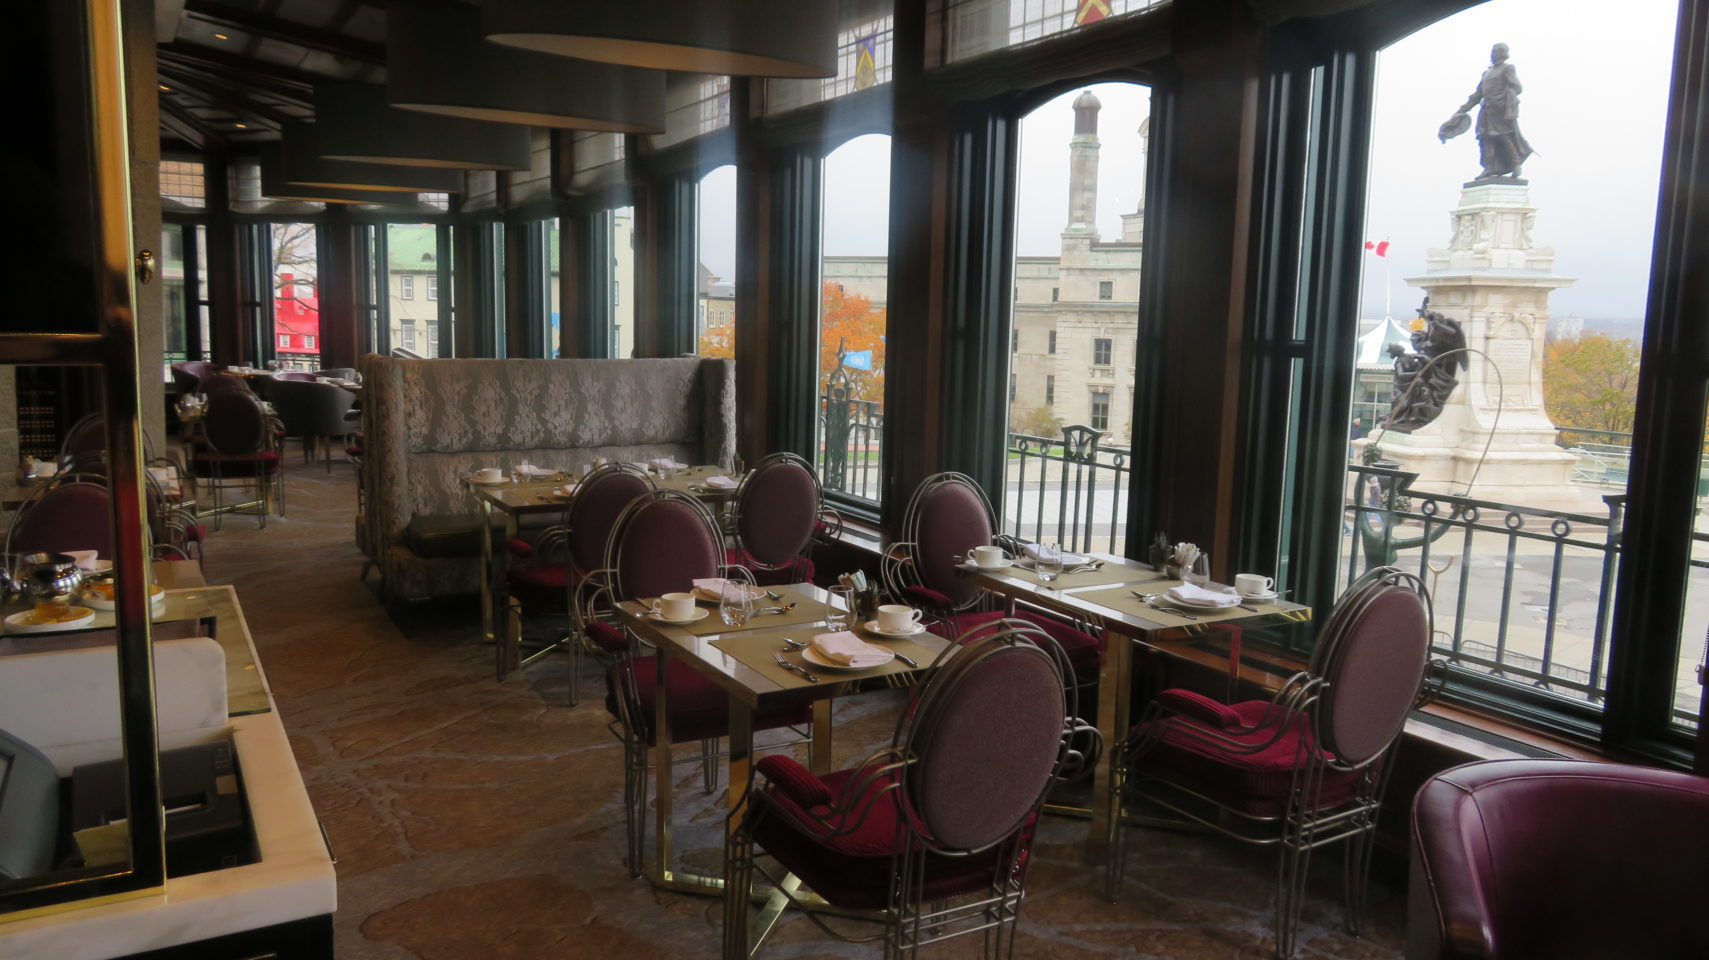 Alcove with a View at the Champlain Restaurant of the Fairmont Le Chateau Frontenac